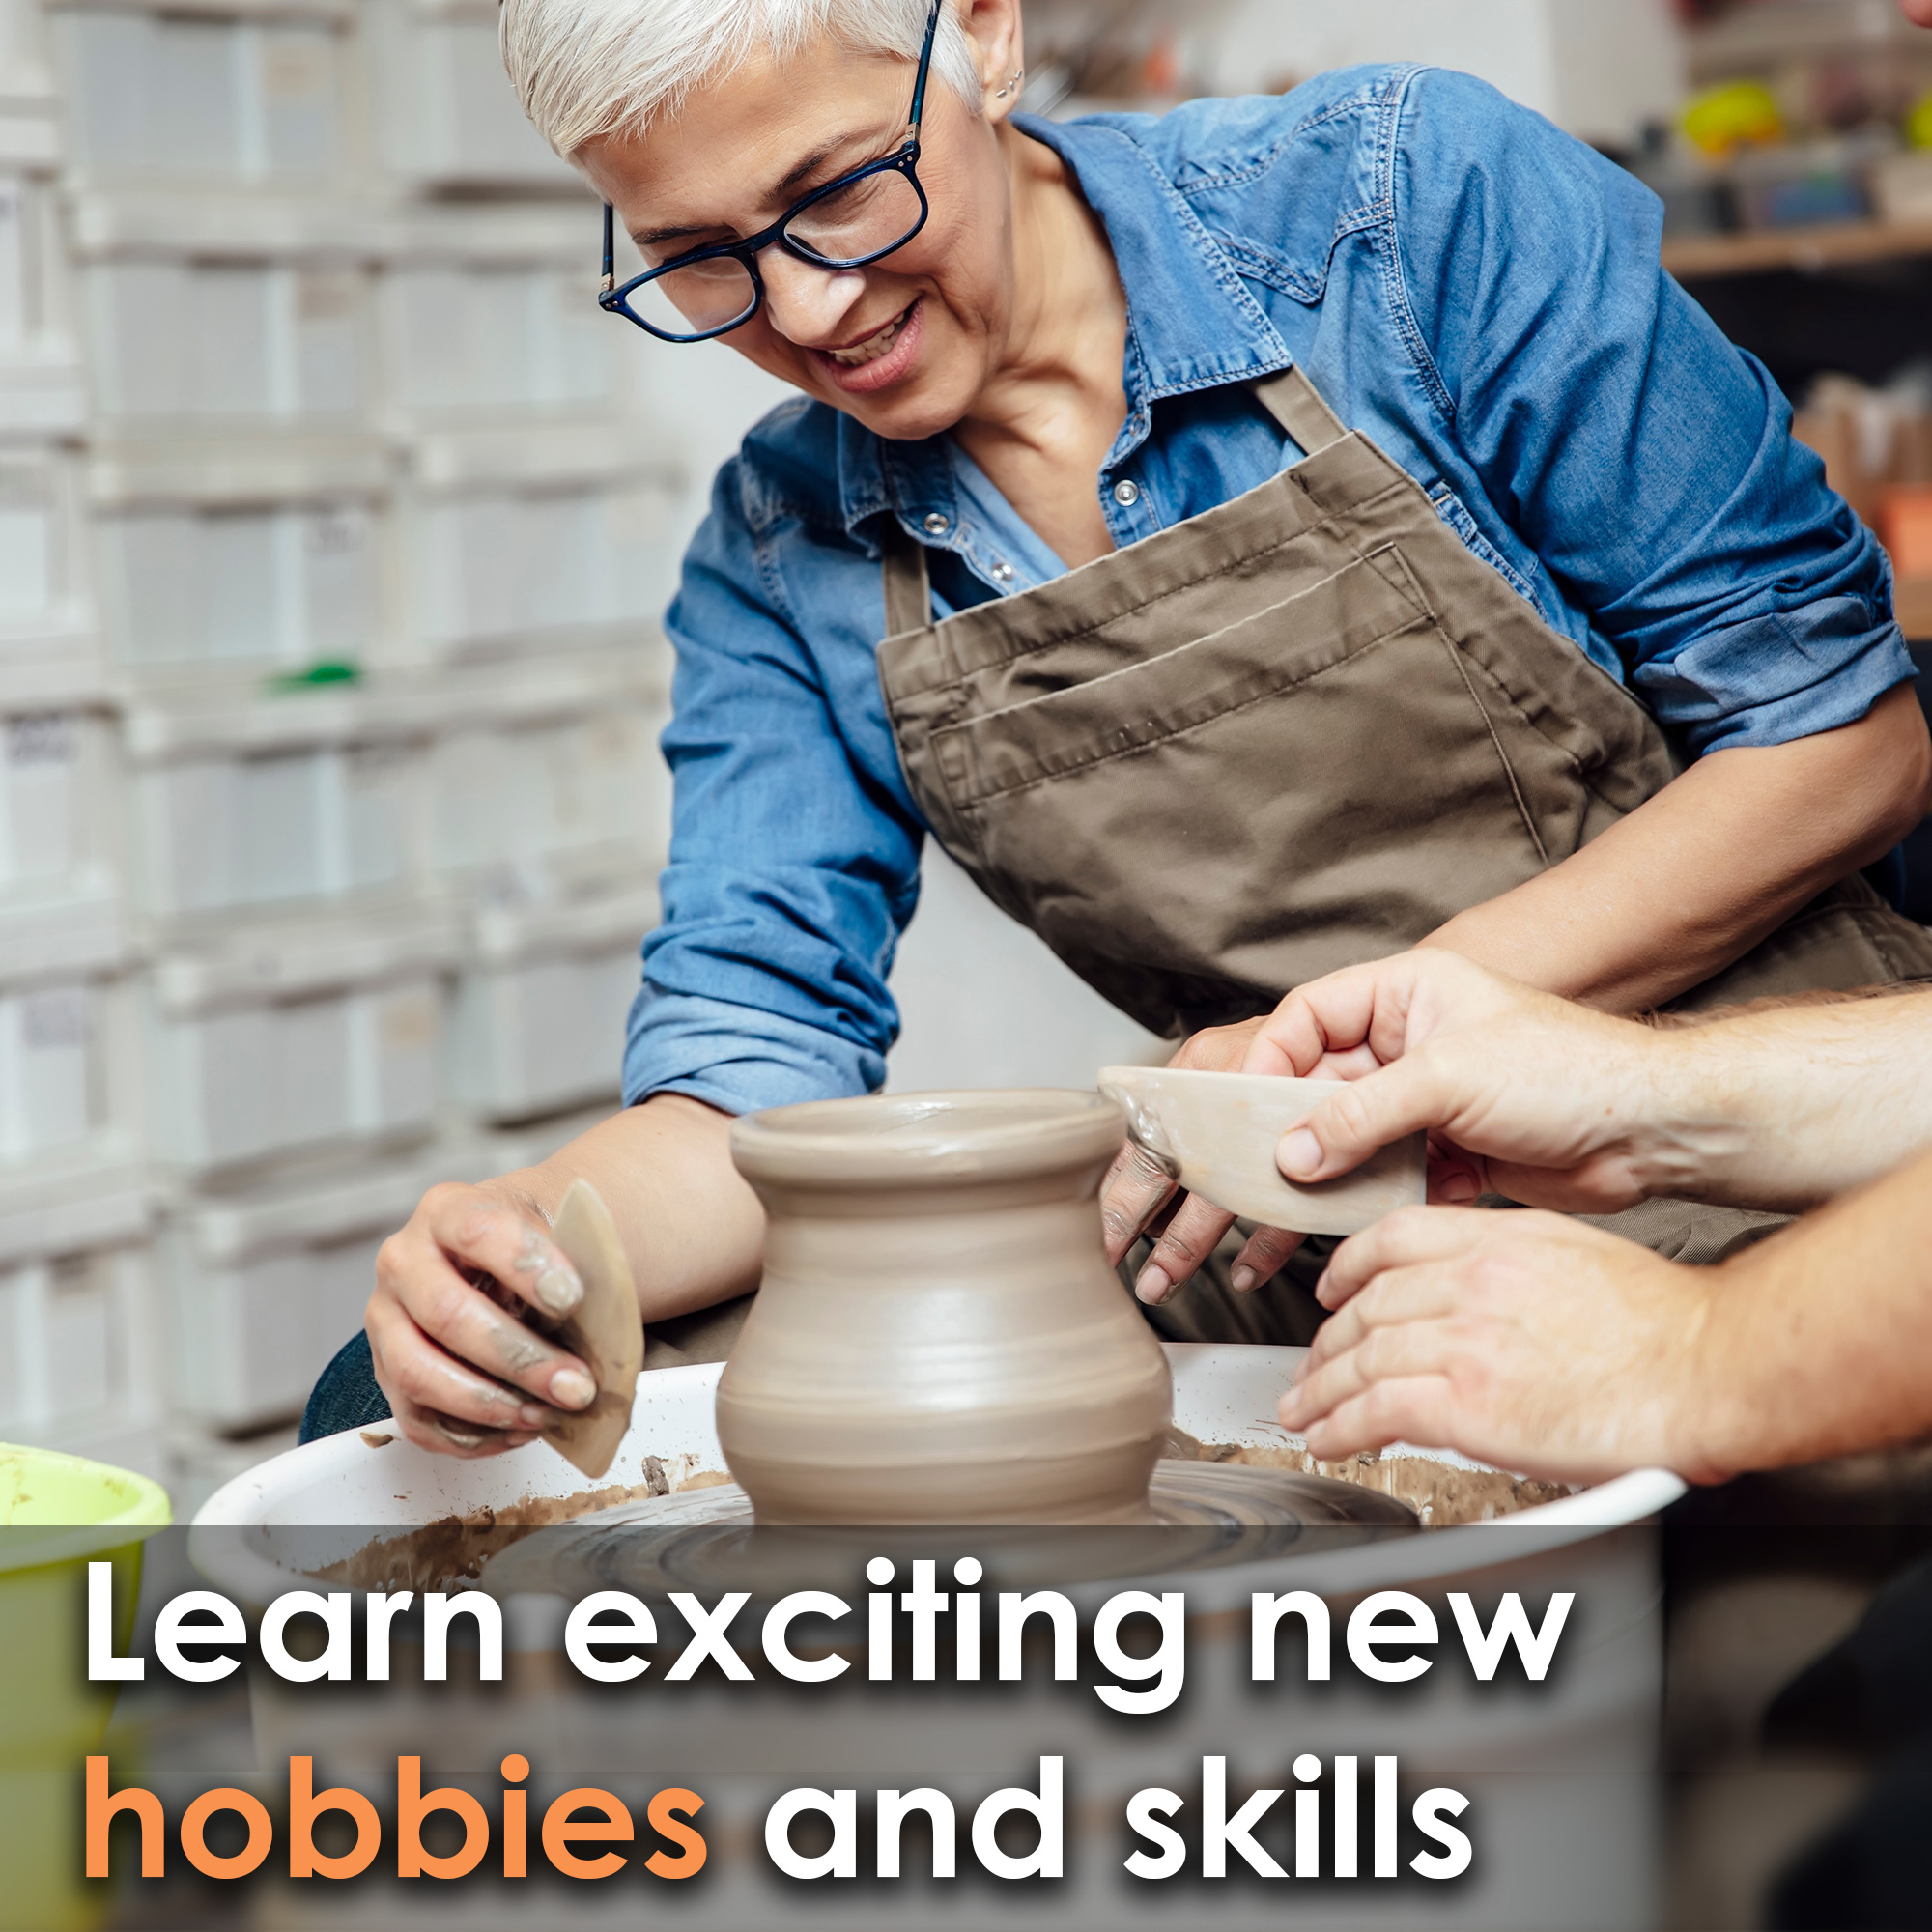 Learn exciting new hobbies and skills